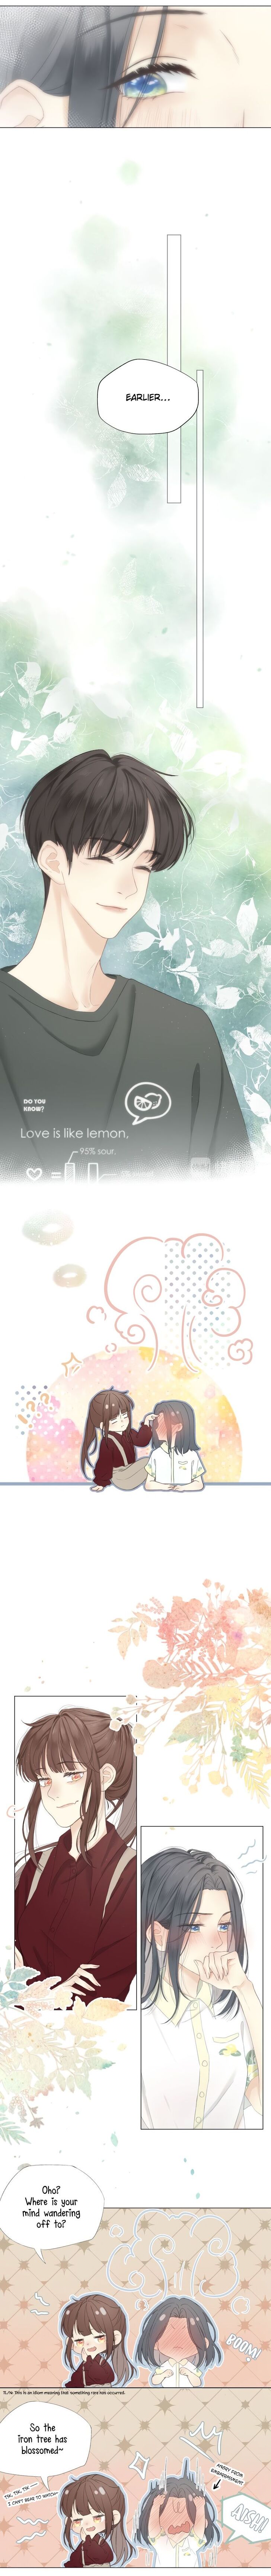 My CP Is So Sweet That I Want To Have A Love Affair chapter 2